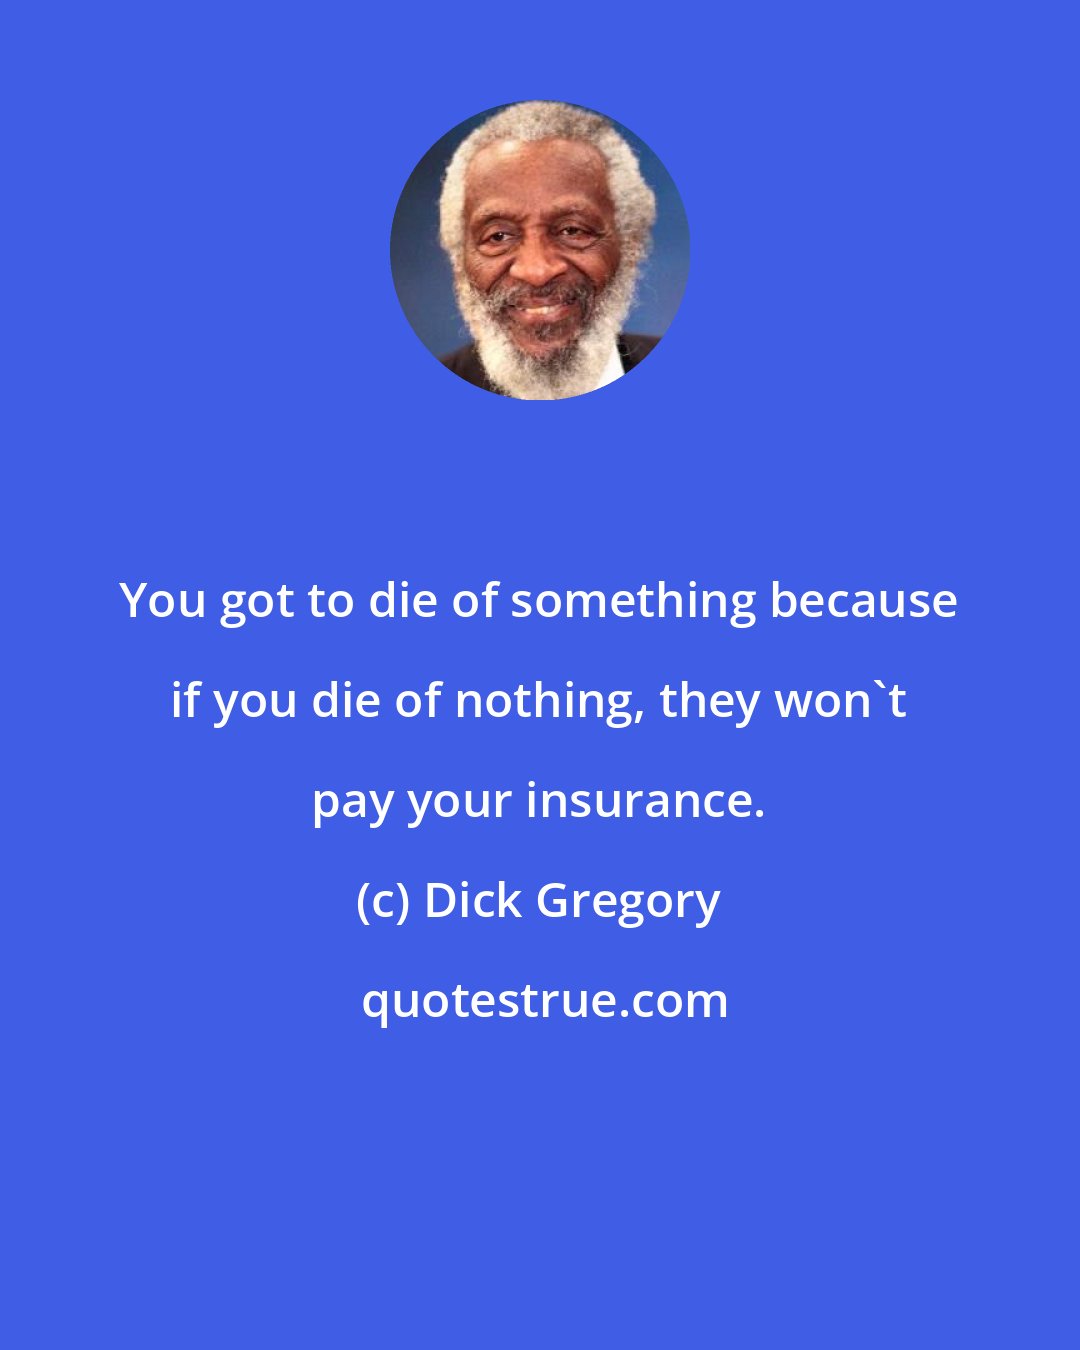 Dick Gregory: You got to die of something because if you die of nothing, they won't pay your insurance.